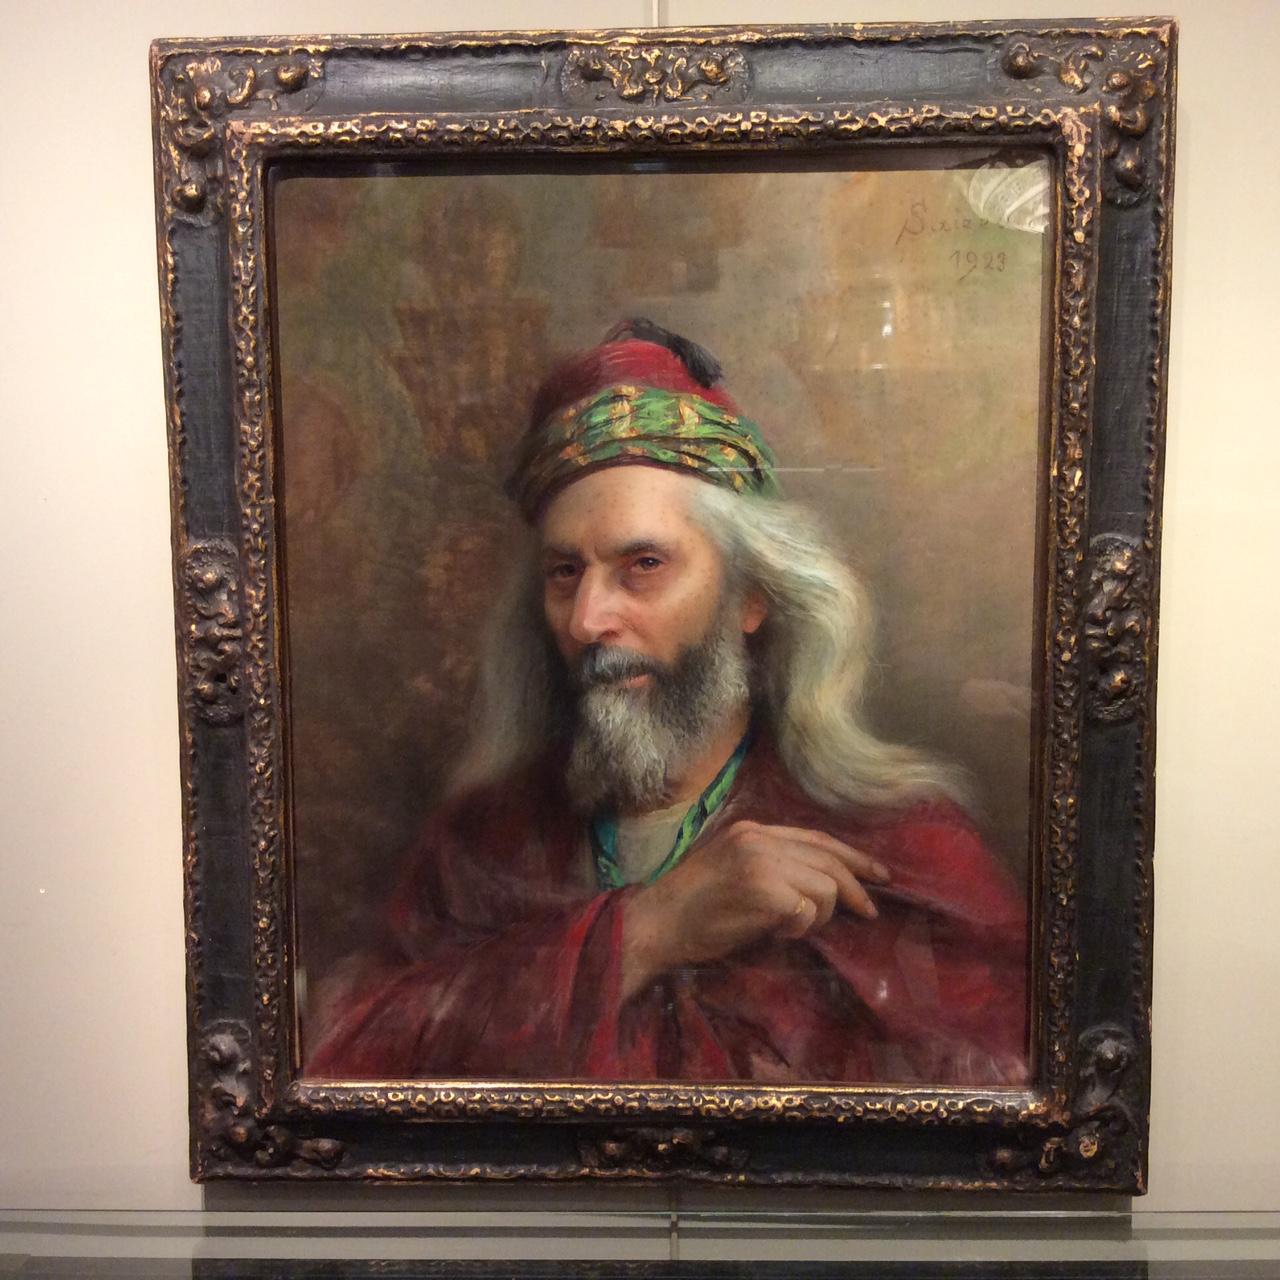 Portrait of Ephraim, one of the sons of Joseph, son of Jacob.
The tribe of Ephraim is generally included in the list of the twelve tribes of Israel in the place of Joseph.
The present Samaritans claim to be descendants of Ephraim (and his brother